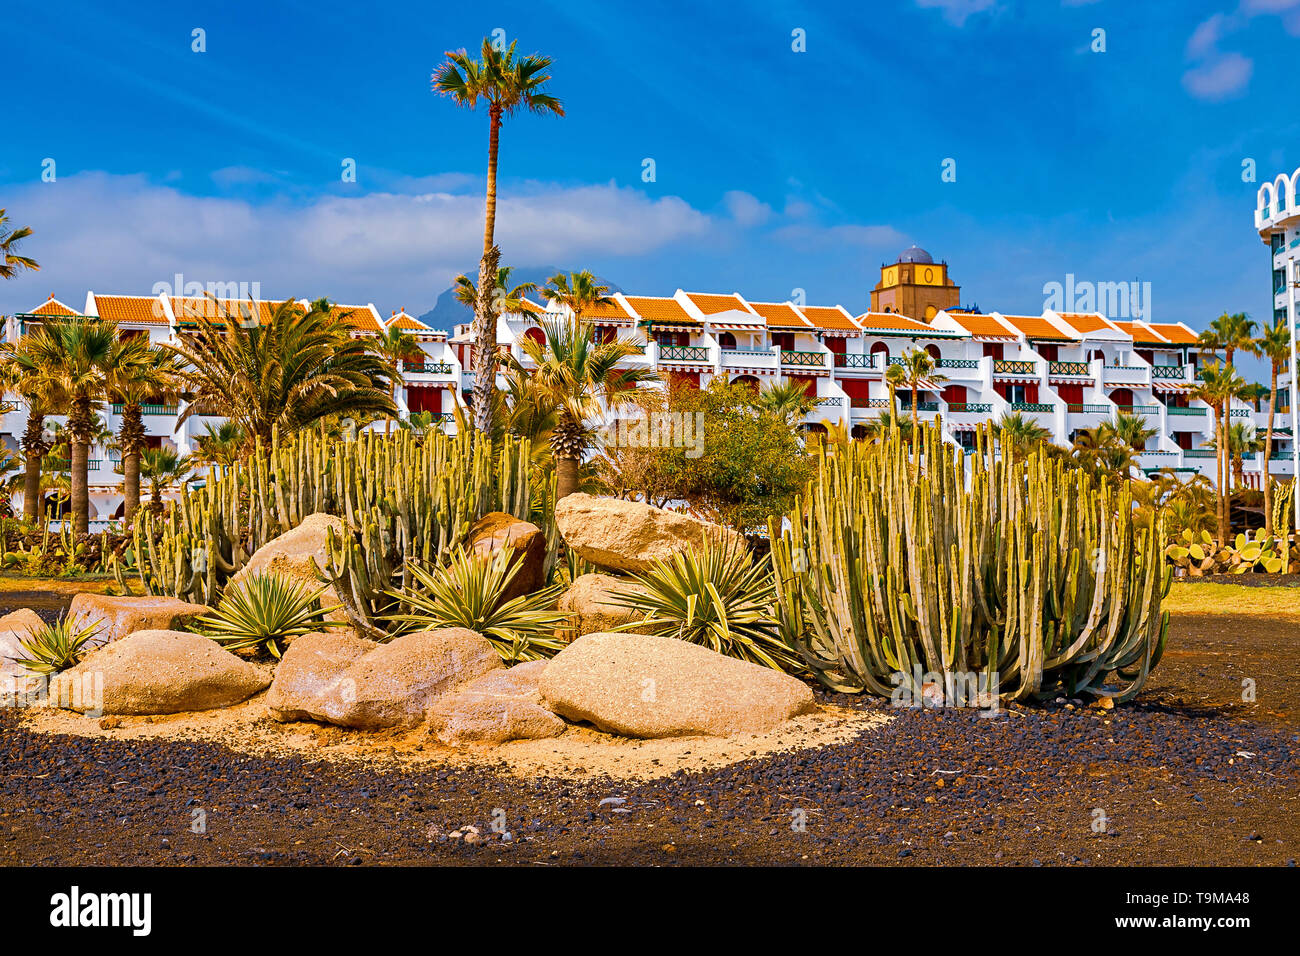 View of different types of cacti on the coast of Playa de las Americas, Tenerife, Canary Islands, Spain. April 29, 2019. Stock Photo